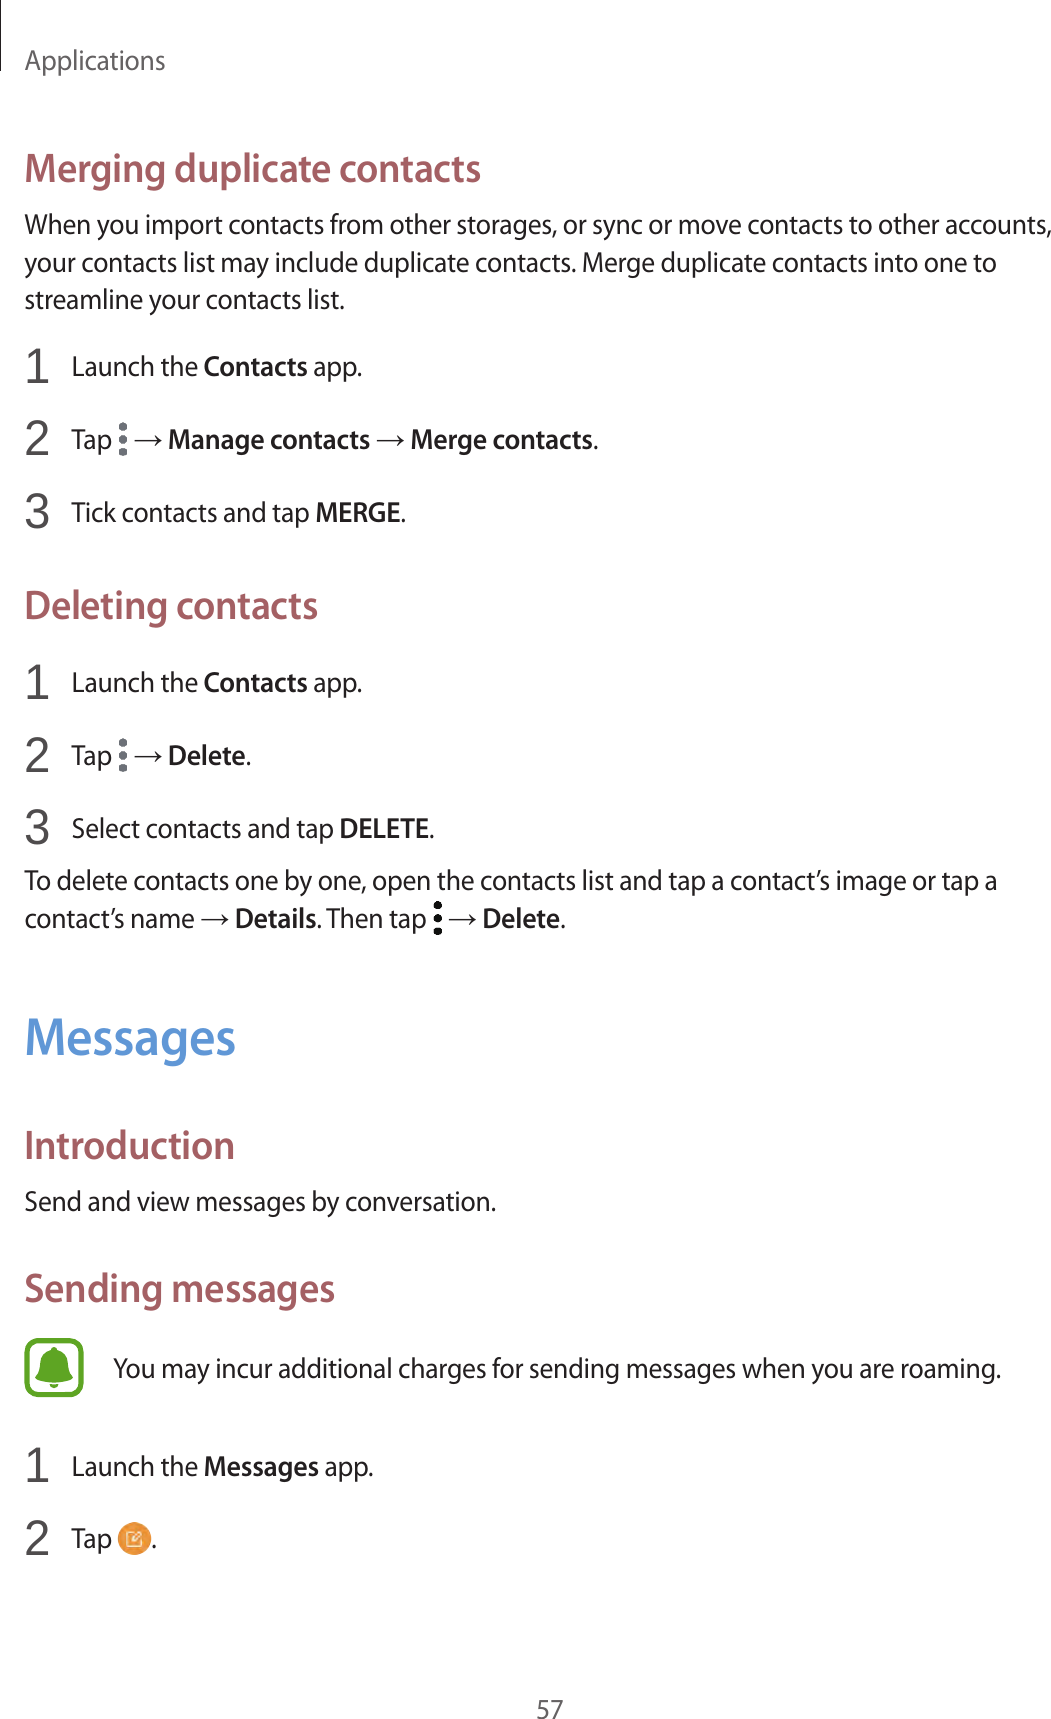 Applications57Merging duplicate contactsWhen you import contacts from other storages, or sync or move contacts to other accounts, your contacts list may include duplicate contacts. Merge duplicate contacts into one to streamline your contacts list.1  Launch the Contacts app.2  Tap   → Manage contacts → Merge contacts.3  Tick contacts and tap MERGE.Deleting contacts1  Launch the Contacts app.2  Tap   → Delete.3  Select contacts and tap DELETE.To delete contacts one by one, open the contacts list and tap a contact’s image or tap a contact’s name → Details. Then tap   → Delete.MessagesIntroductionSend and view messages by conversation.Sending messagesYou may incur additional charges for sending messages when you are roaming.1  Launch the Messages app.2  Tap  .